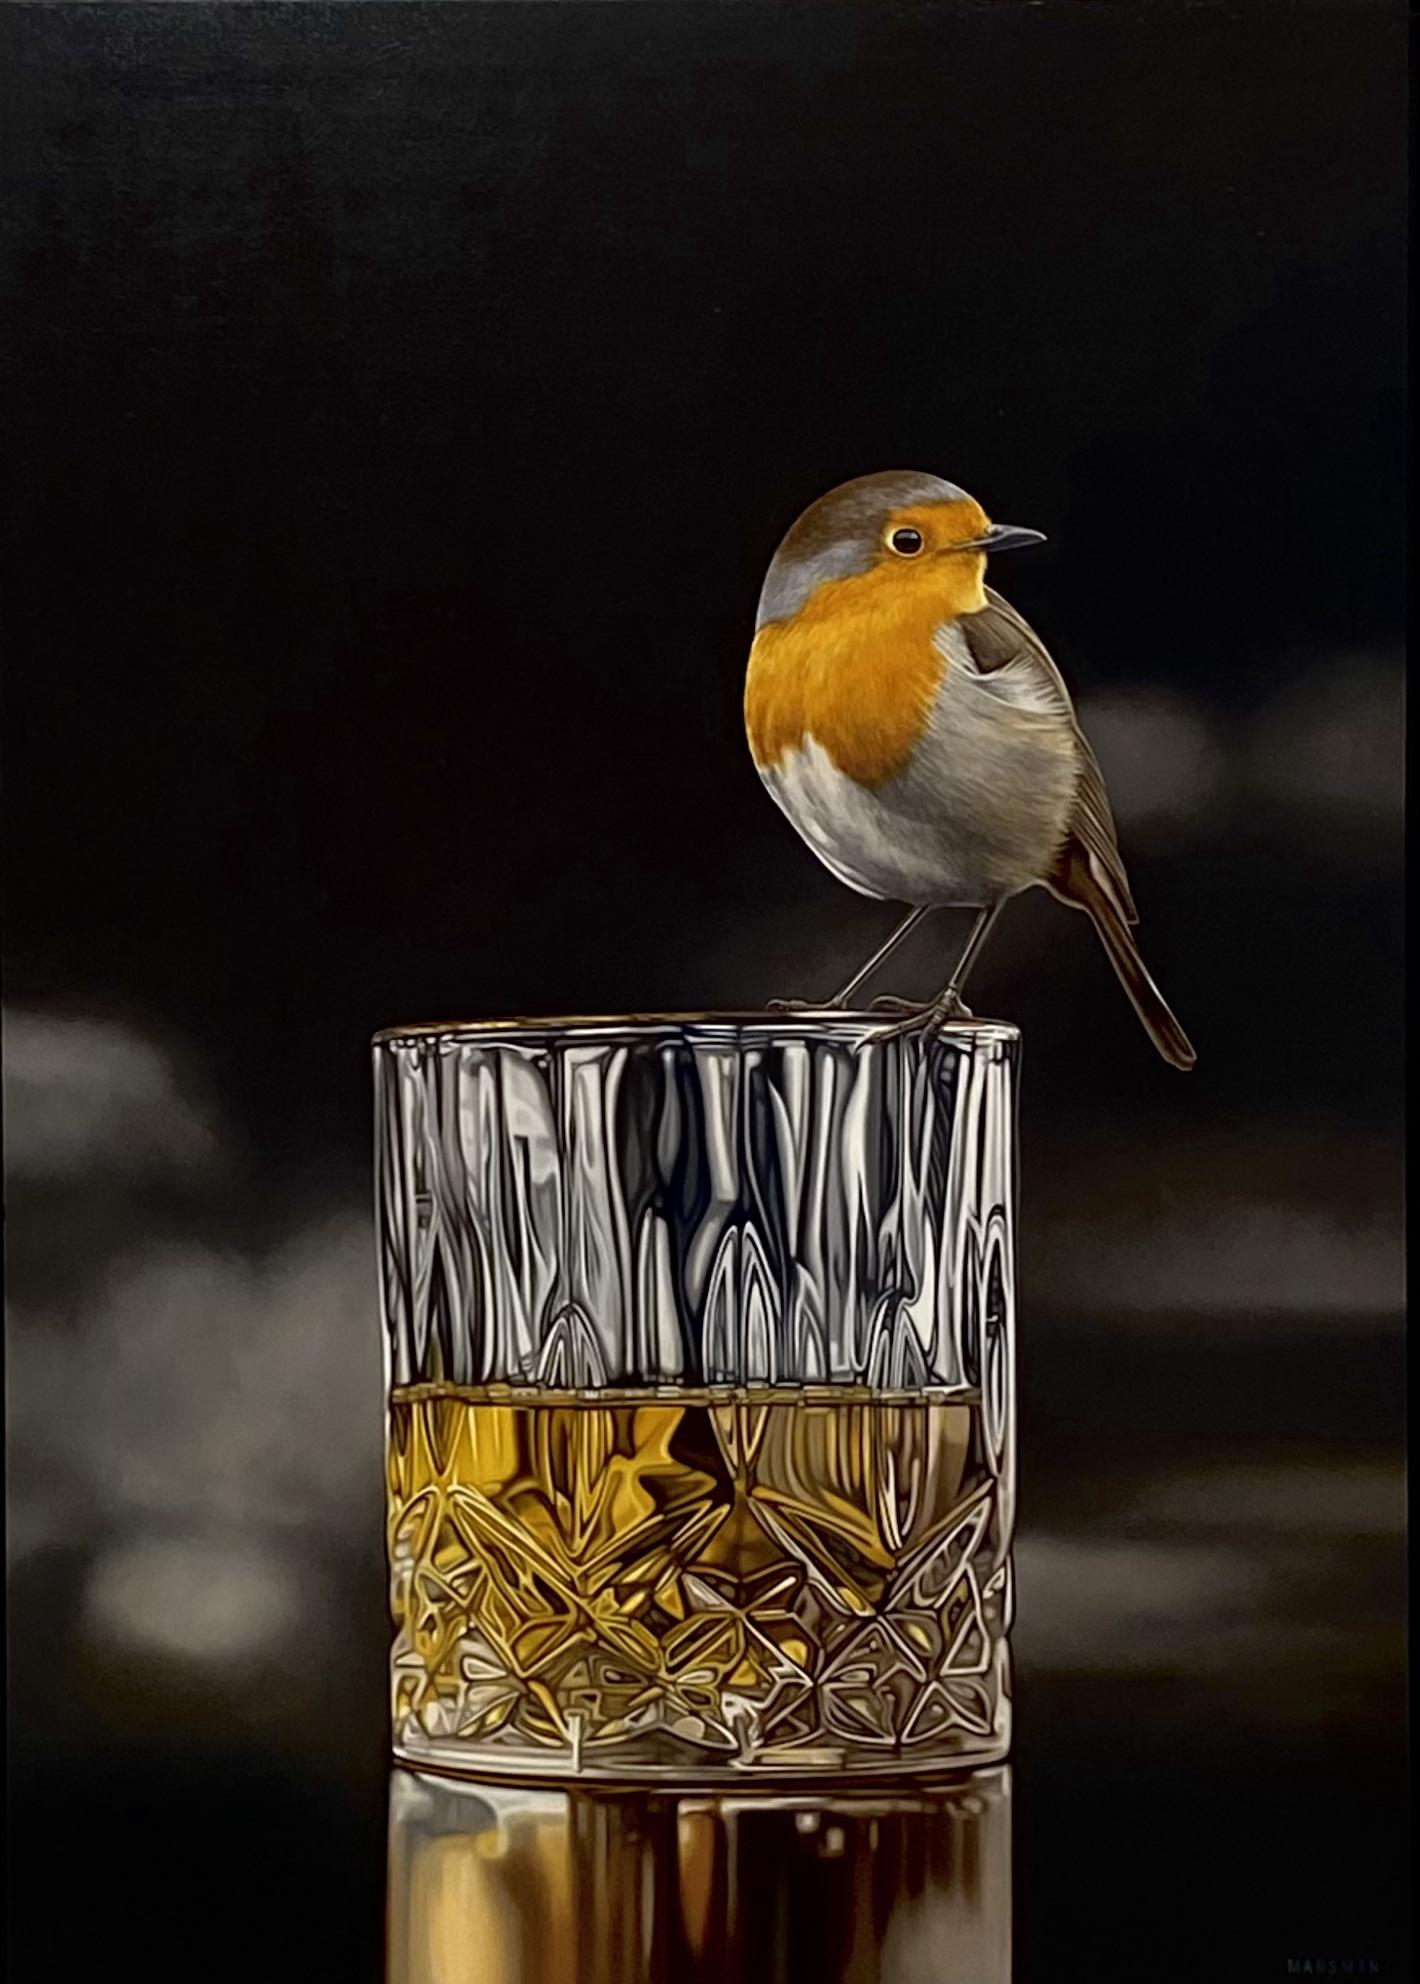 Robin versus Whiskey- 21st Century Contemporary oilpainting of a bird on a glass - Painting by JP Marsman